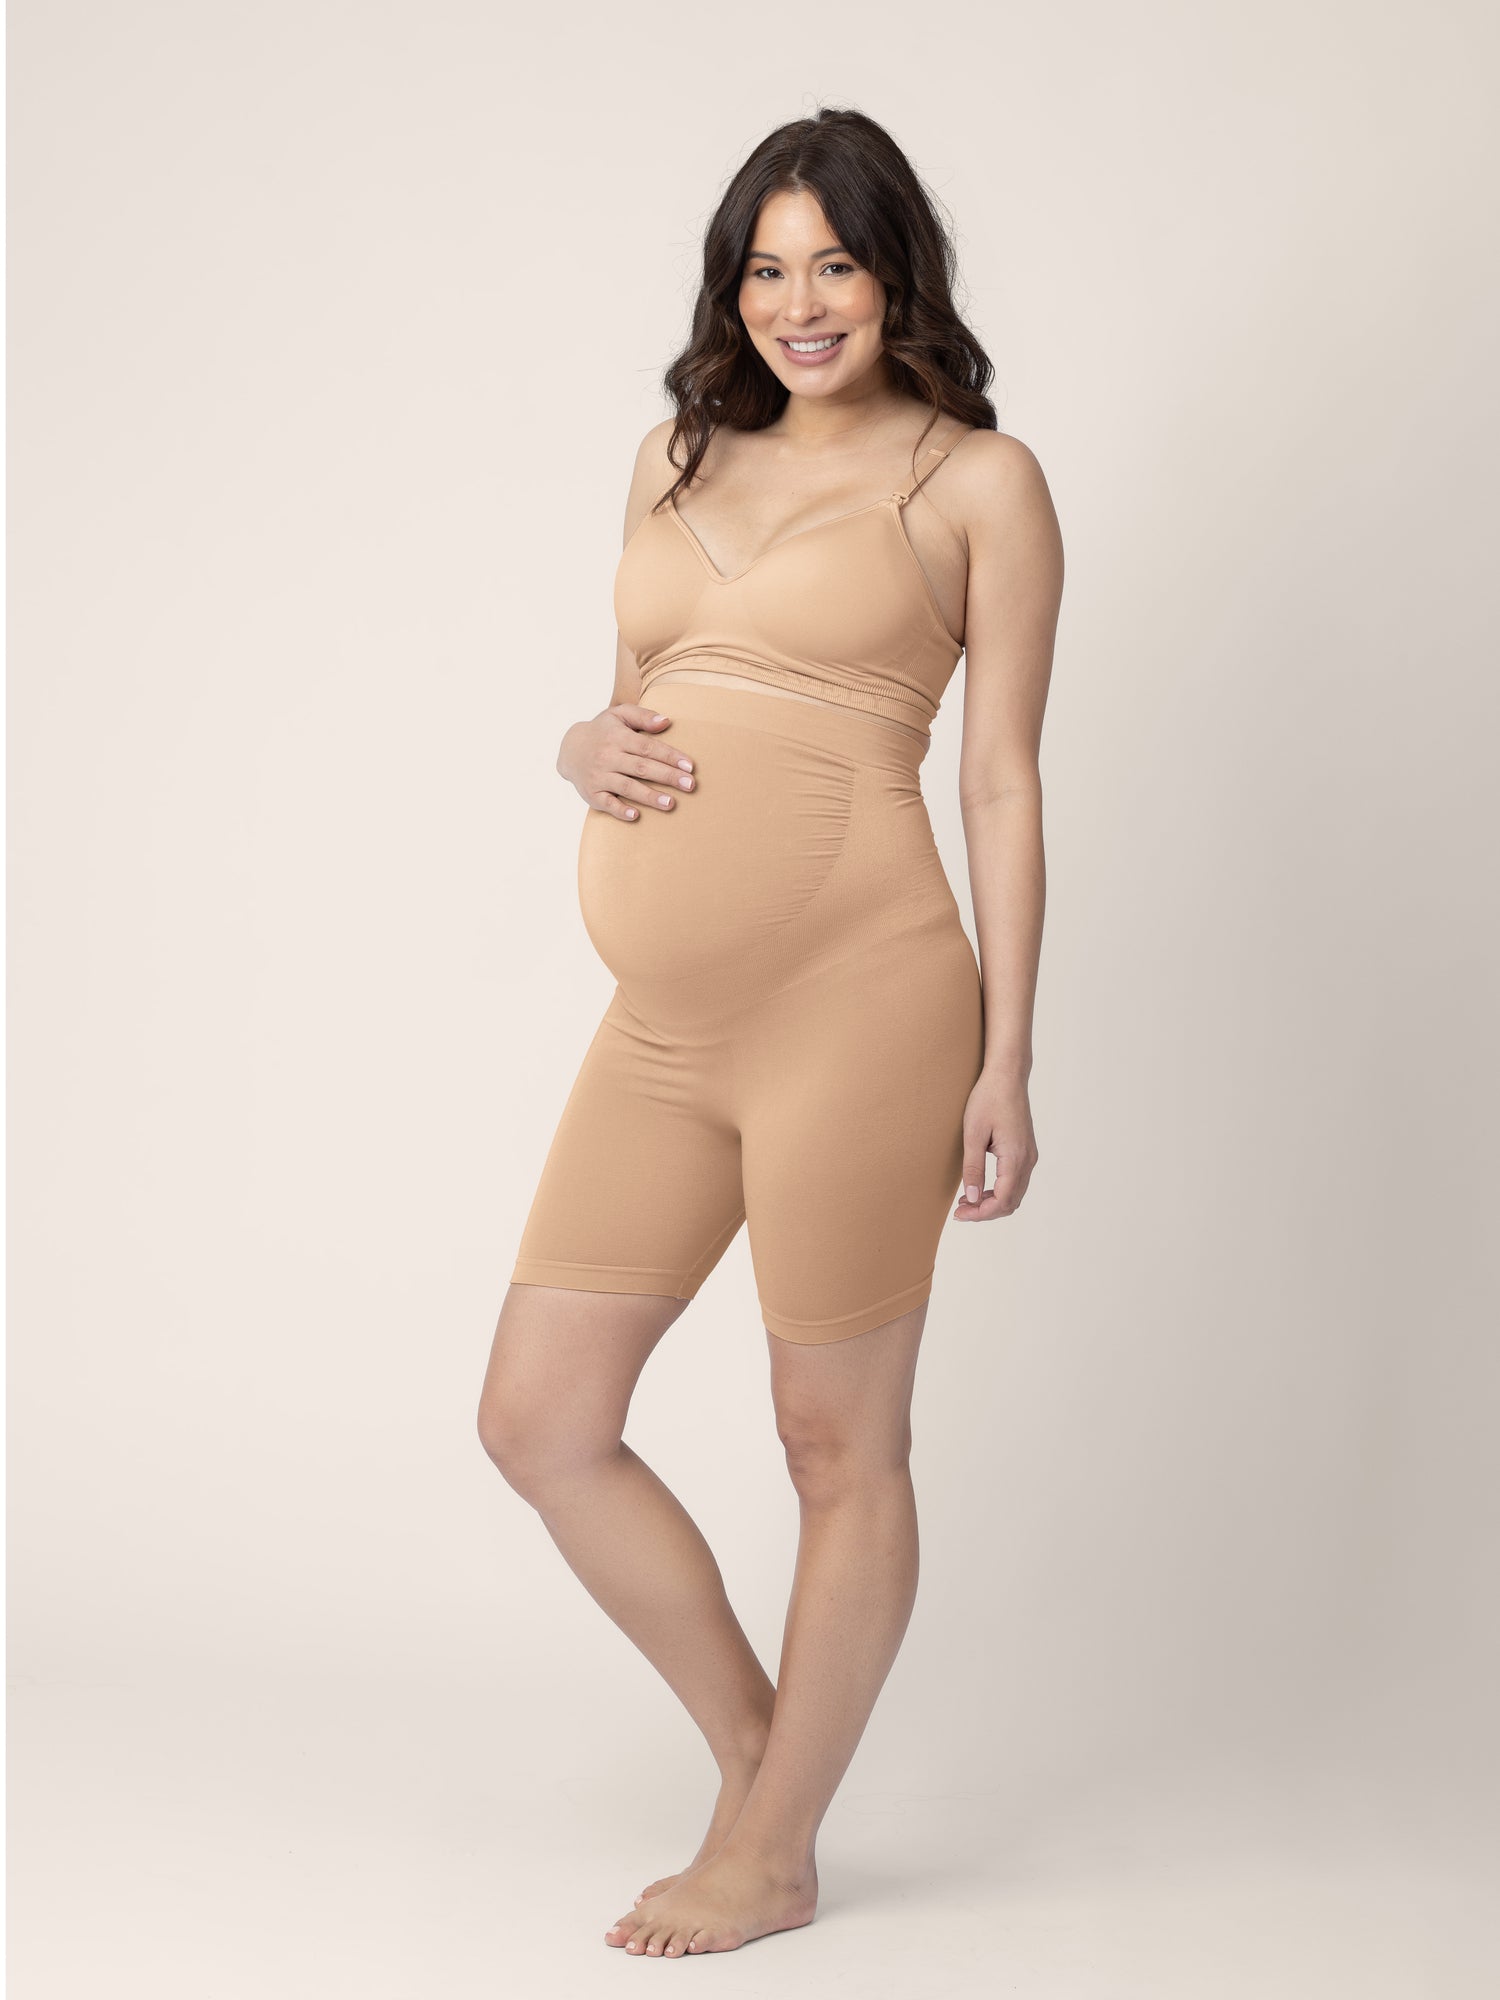 Post Pregnancy Shapewear - Mums and Bumps